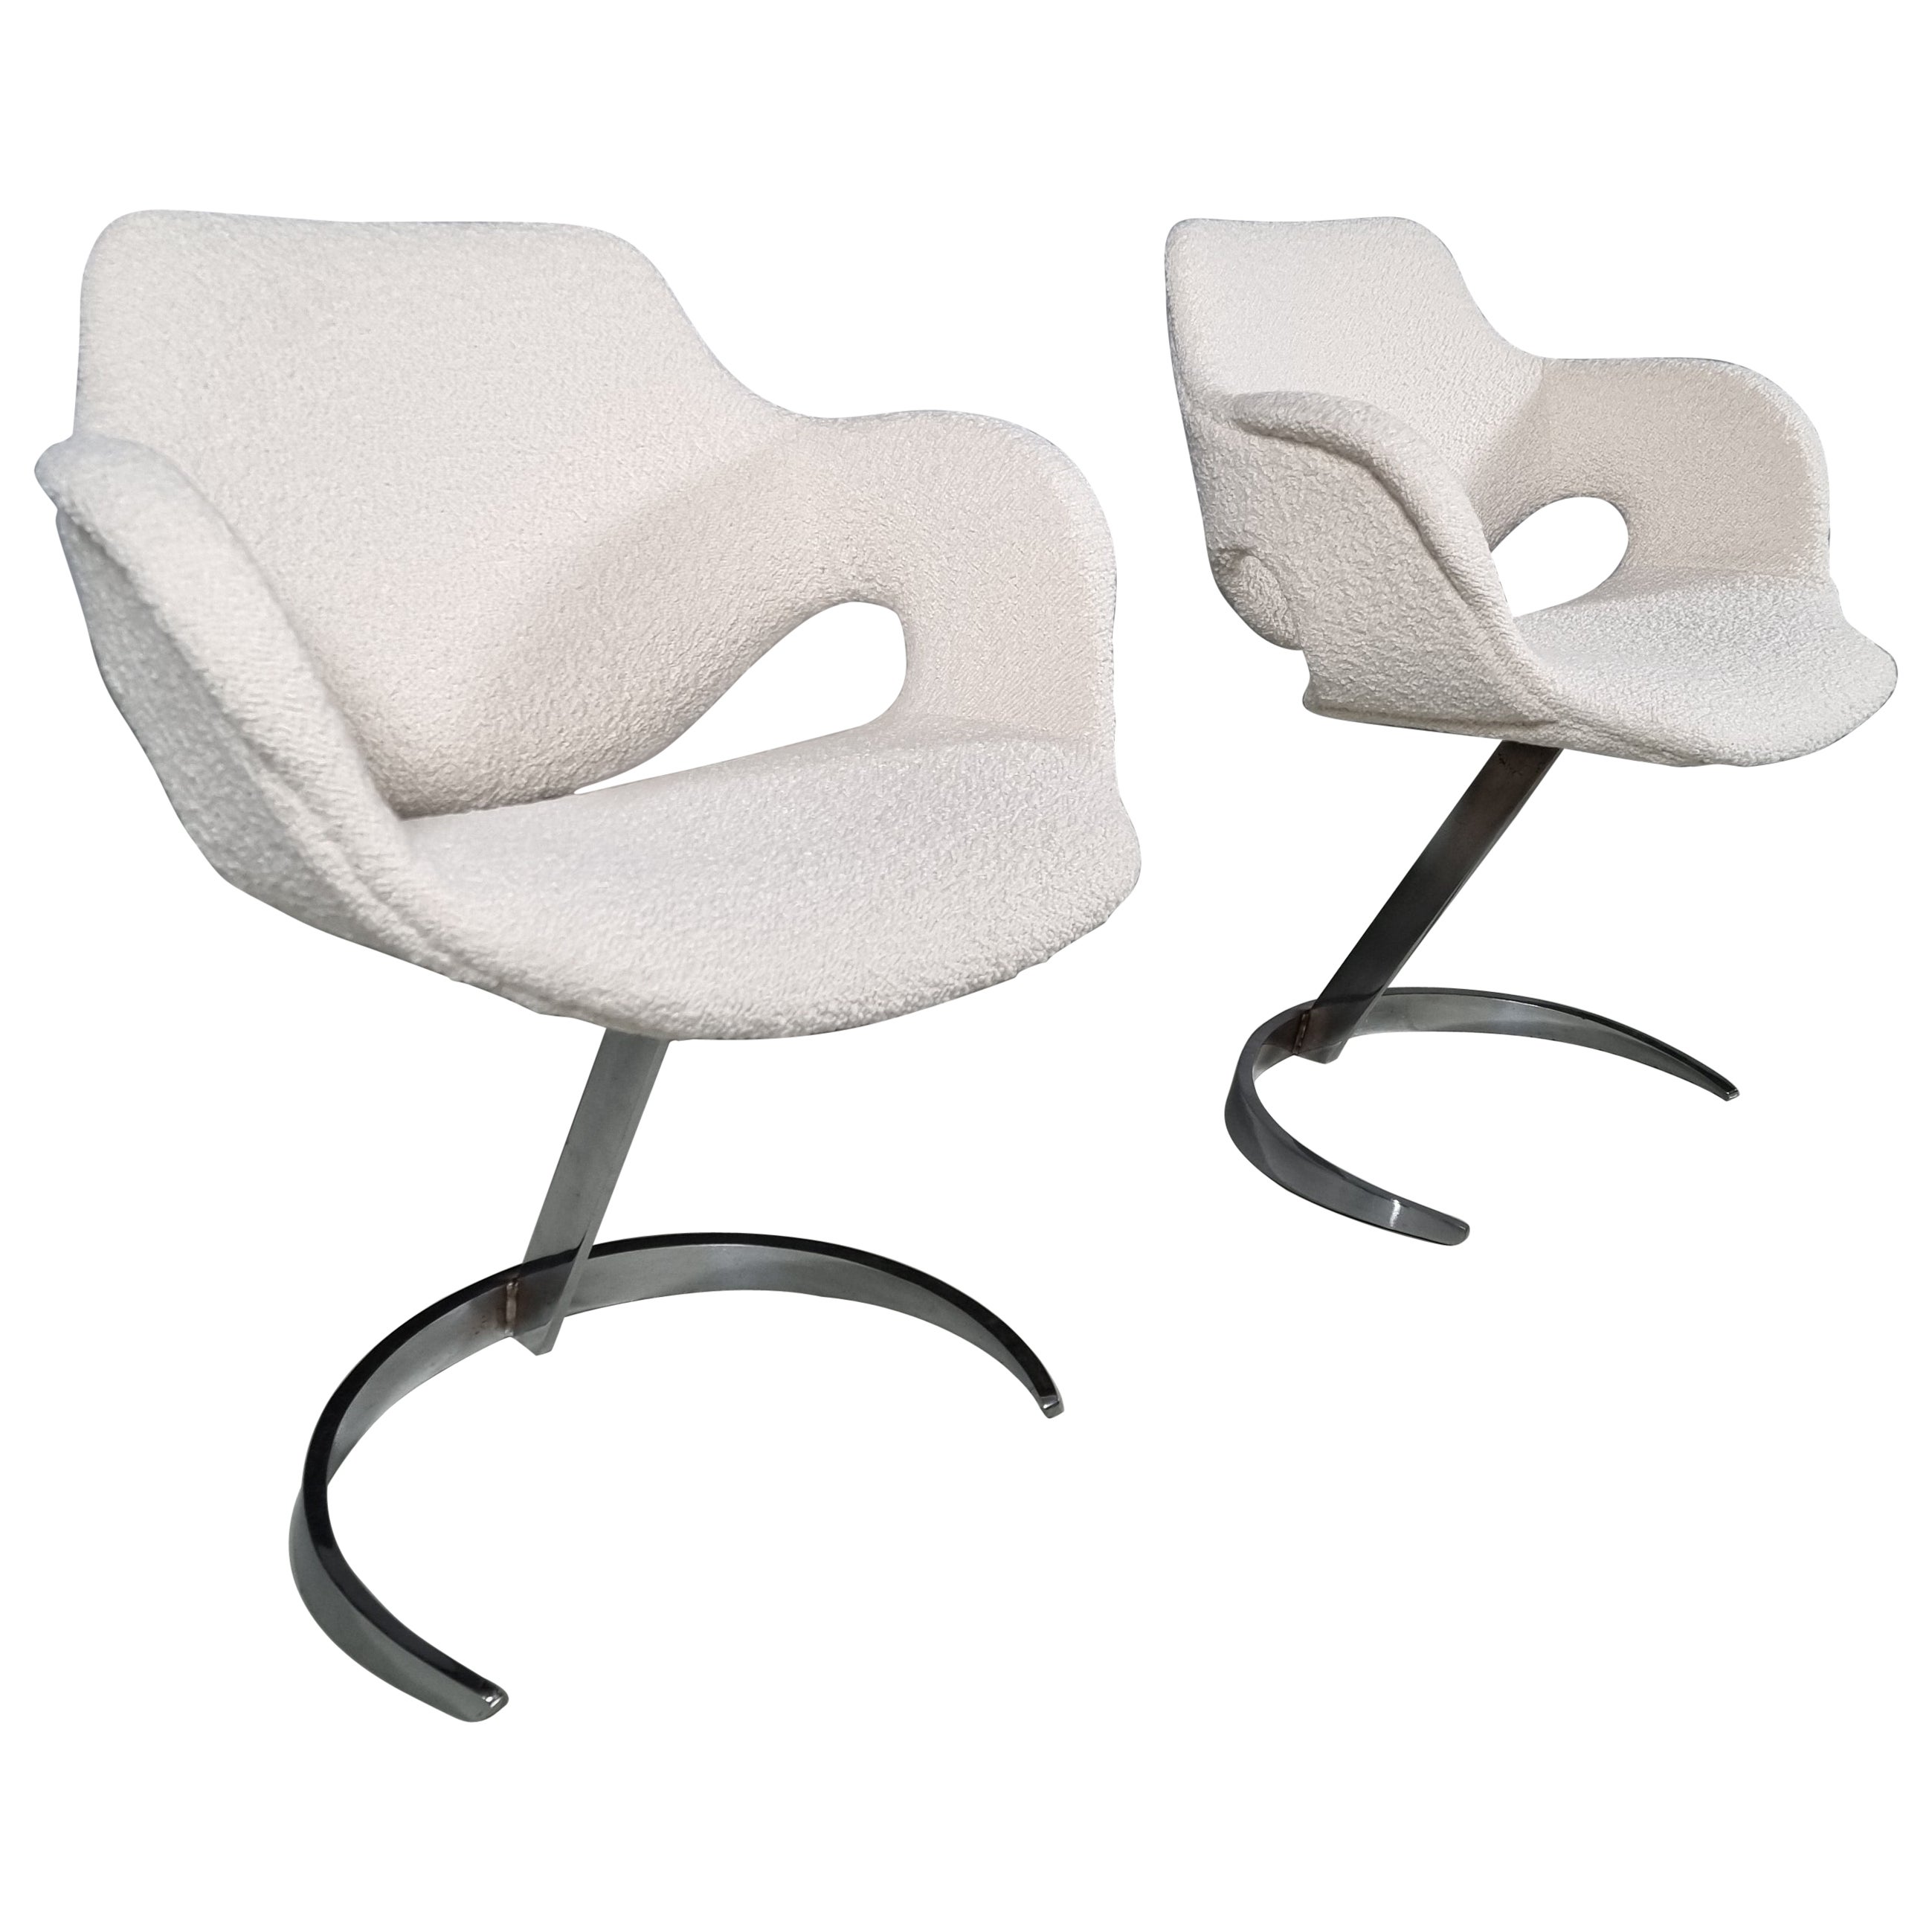 Boris Tabacoff Scimitar Chairs in bouclé, Mobilier Modulaire Moderne 'MMM'